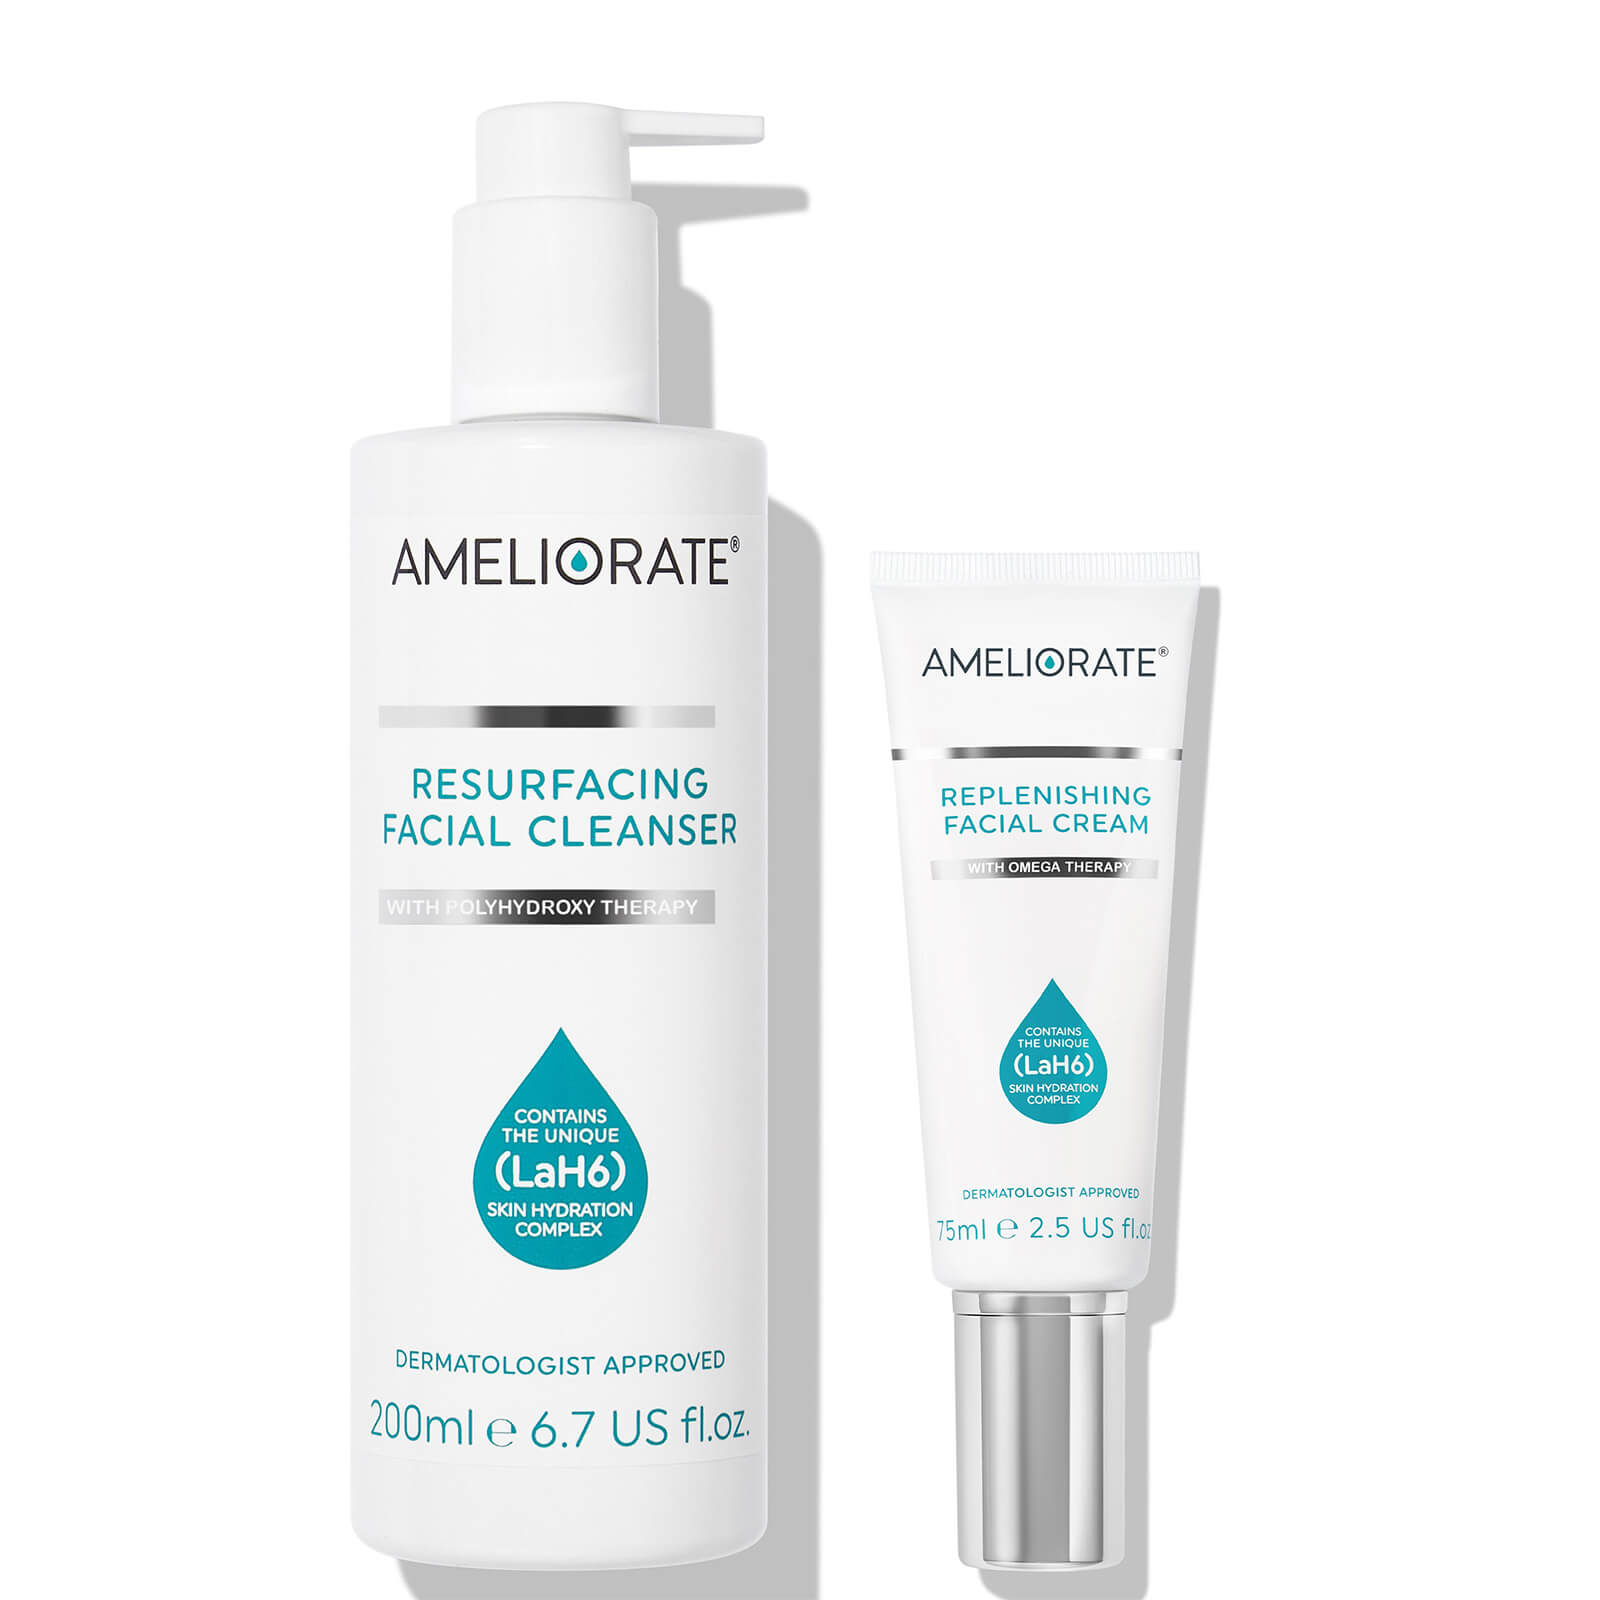 AMELIORATE Facial Cleansing Kit (Worth PS48.00)